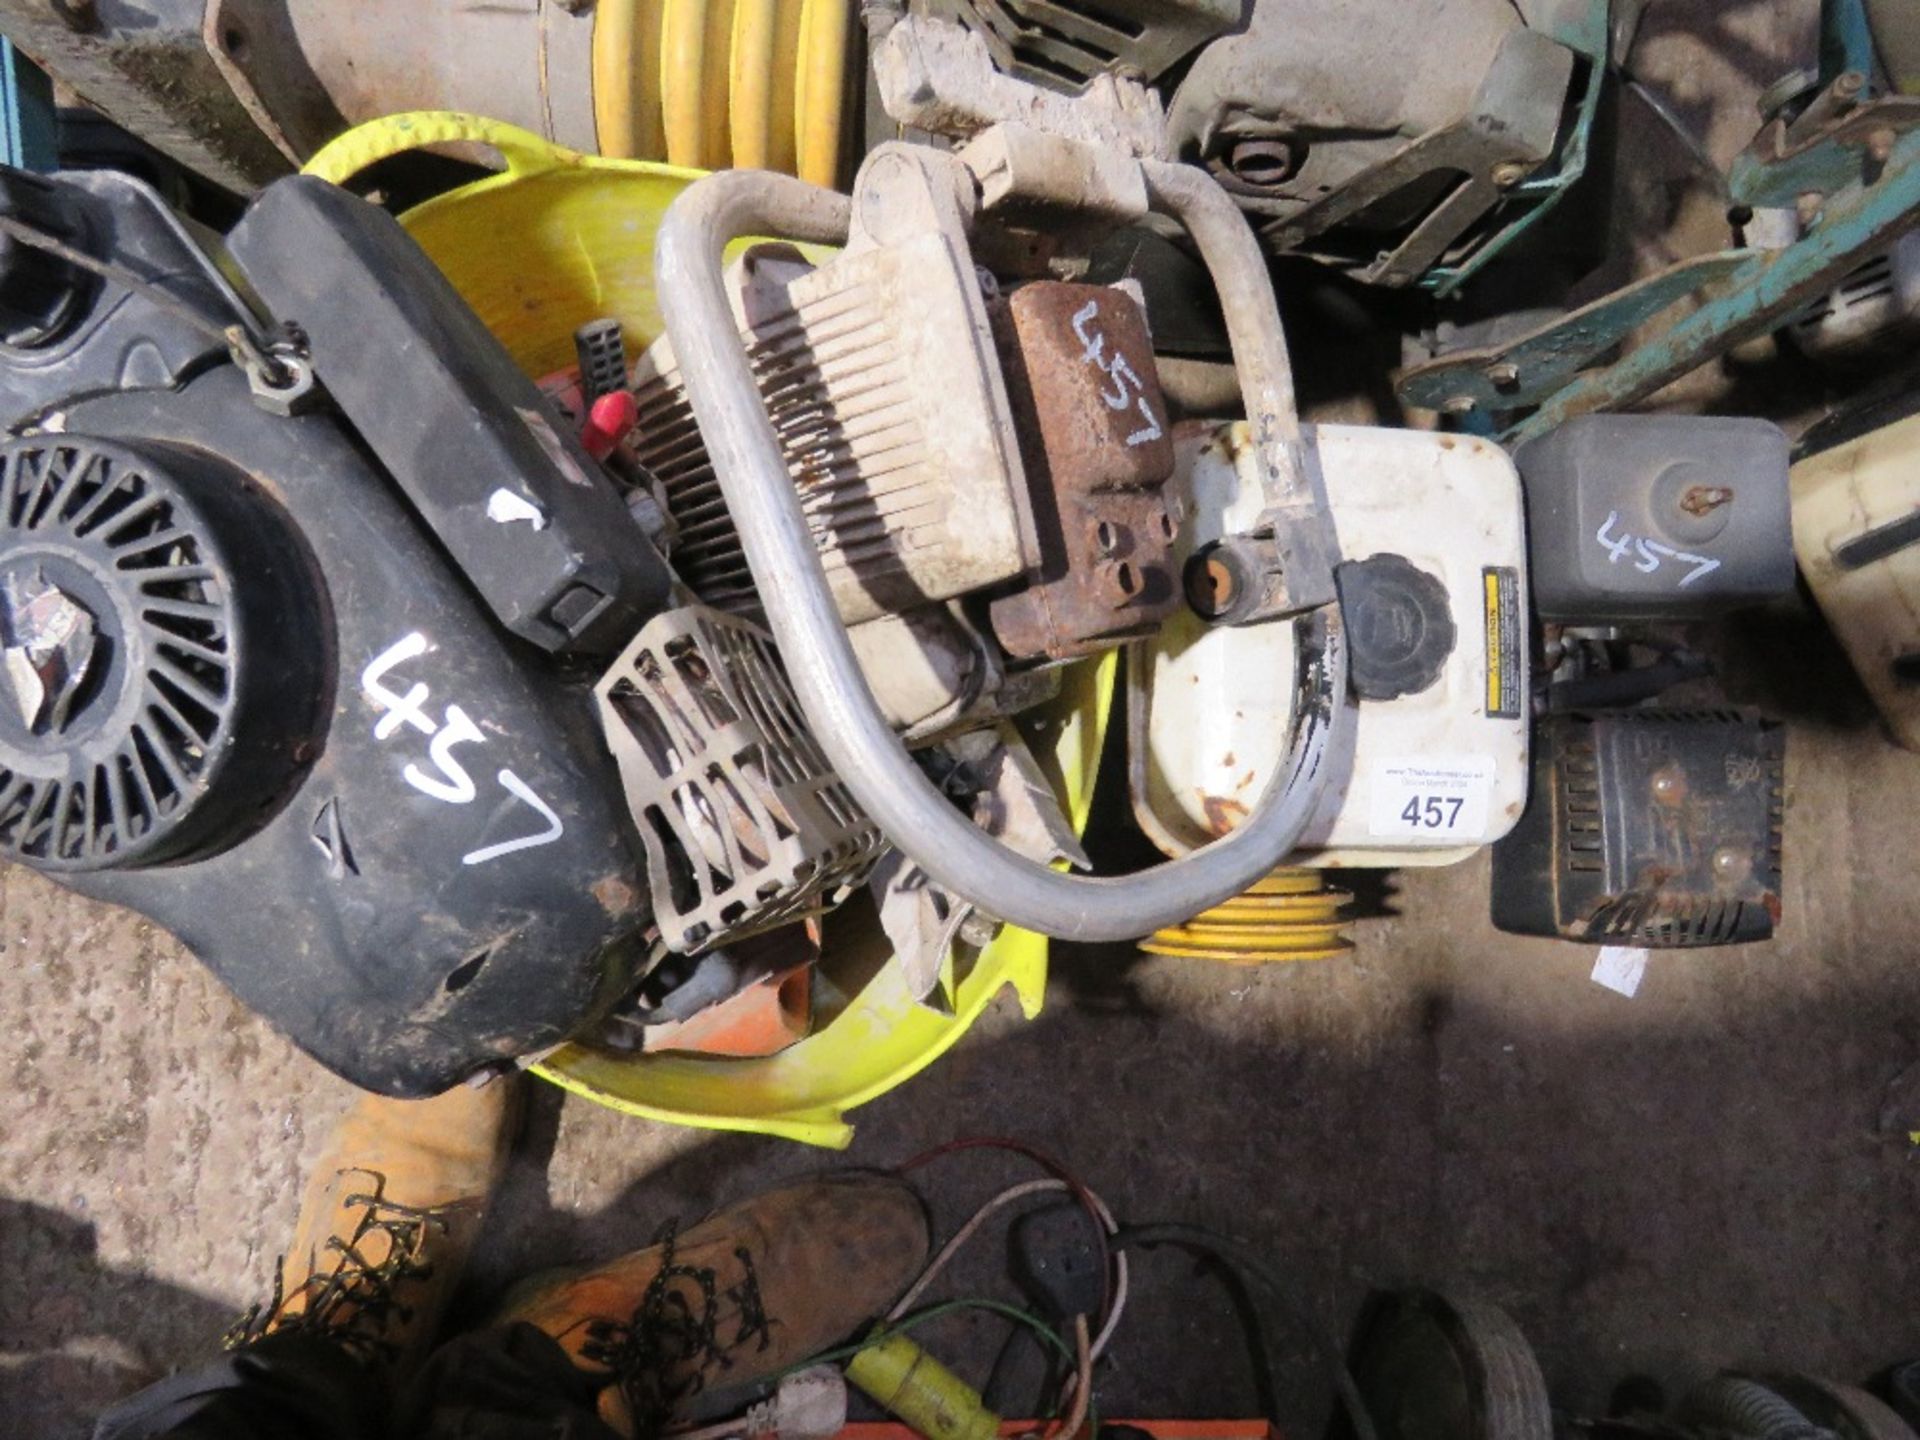 STIHL SAW PARTS PLUS 2 X PETROL ENGINES. THIS LOT IS SOLD UNDER THE AUCTIONEERS MARGIN SCHEME, THE